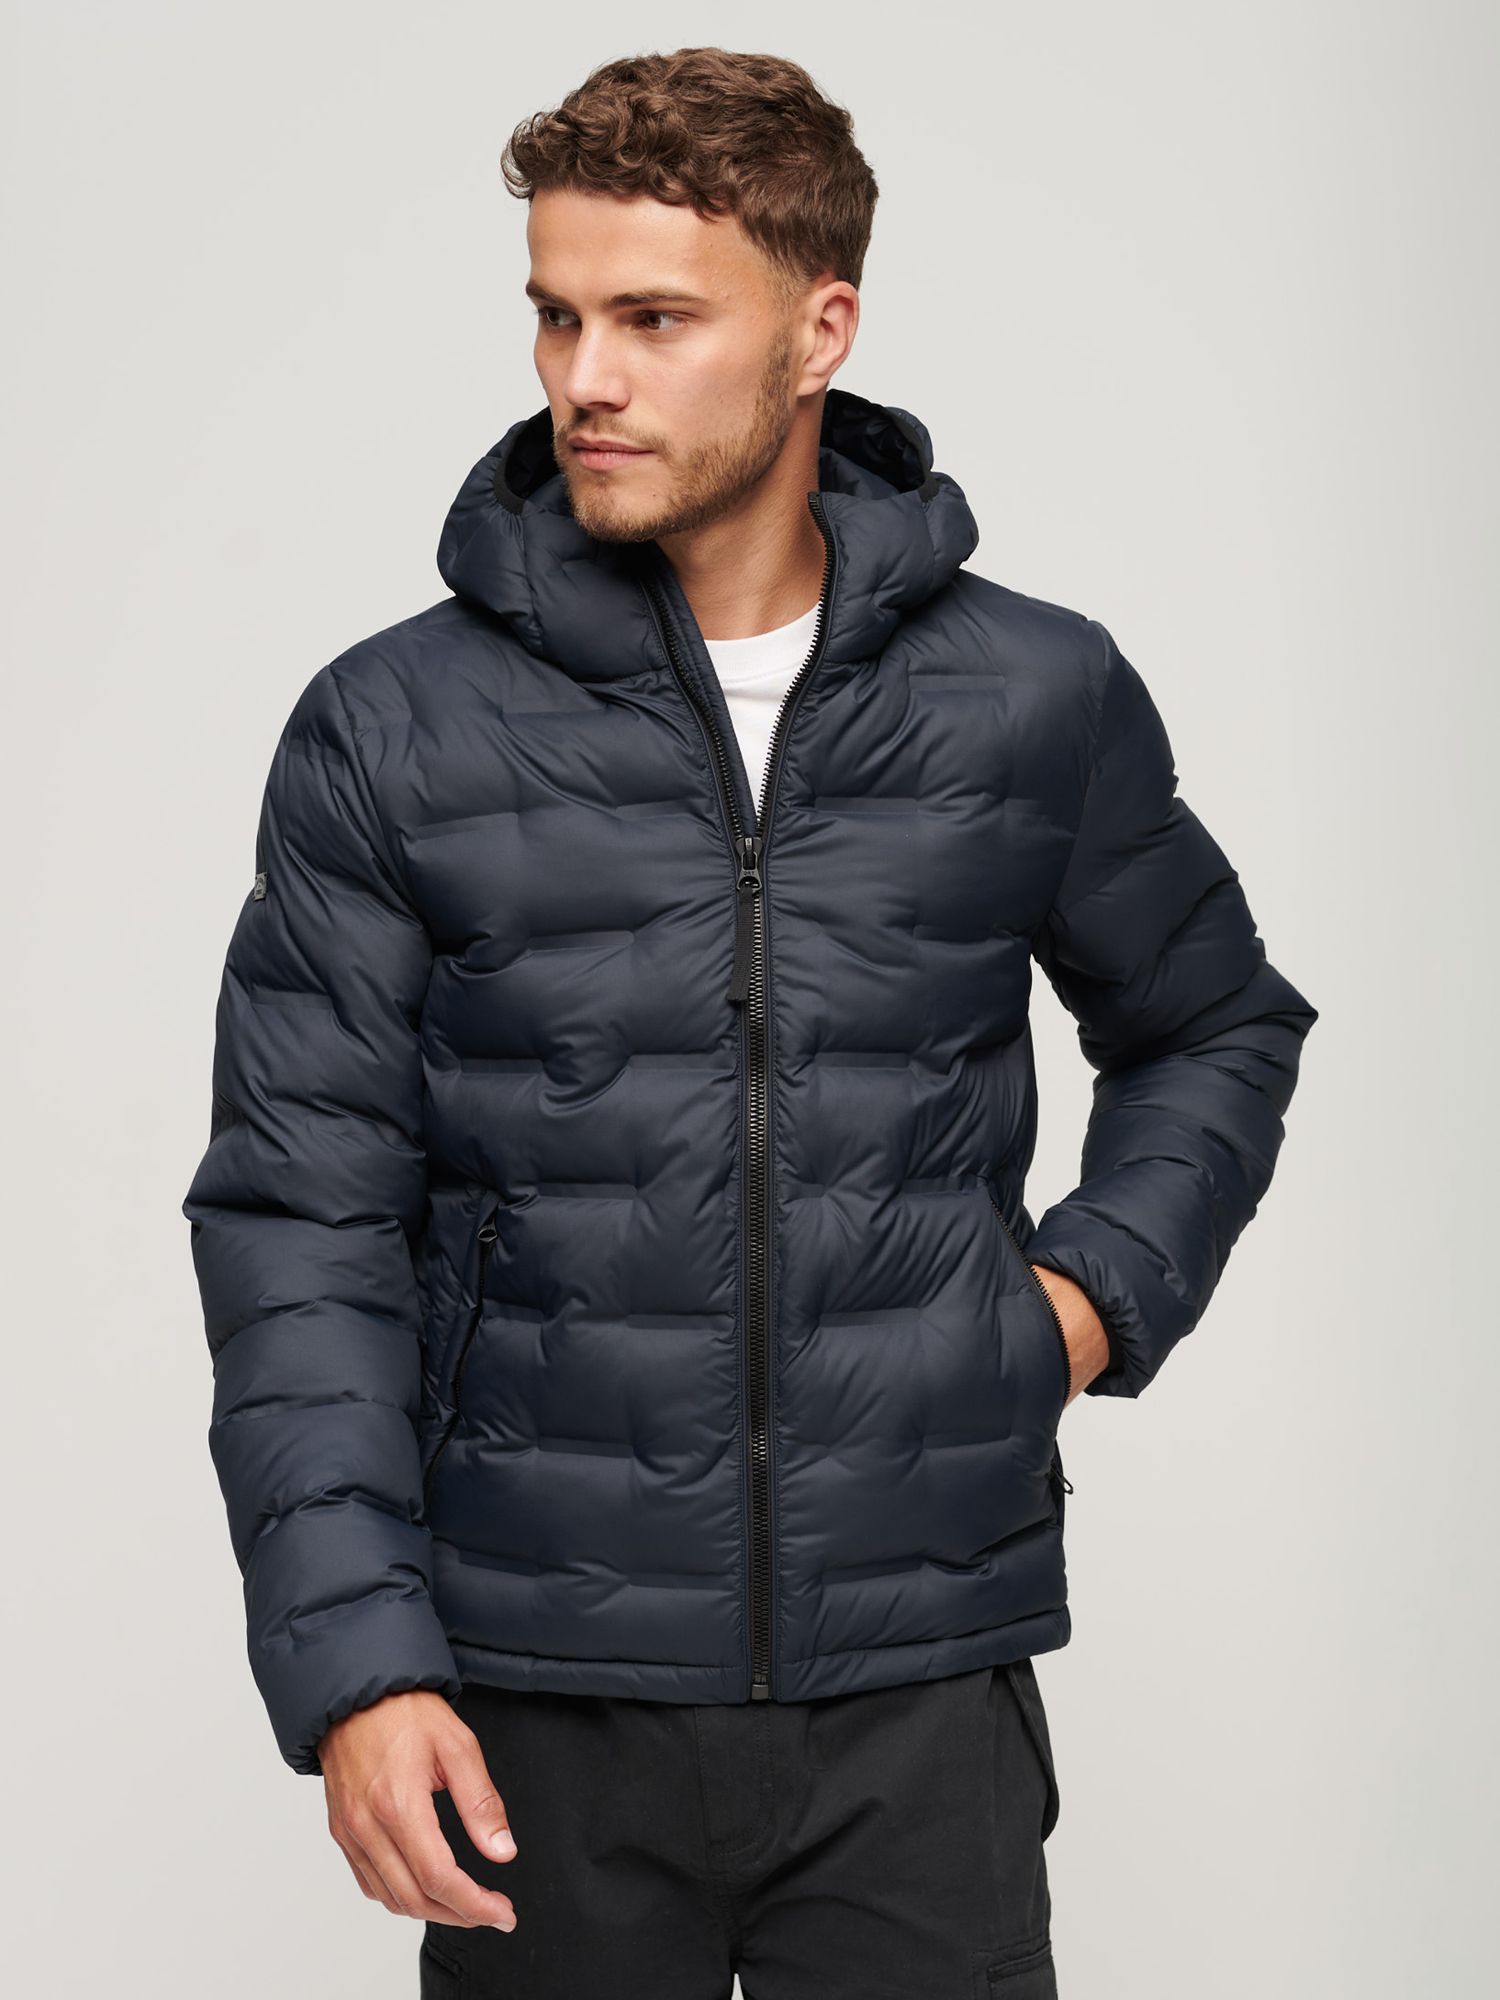 Superdry Short Quilted Puffer Jacket, Eclipse Navy at John Lewis & Partners